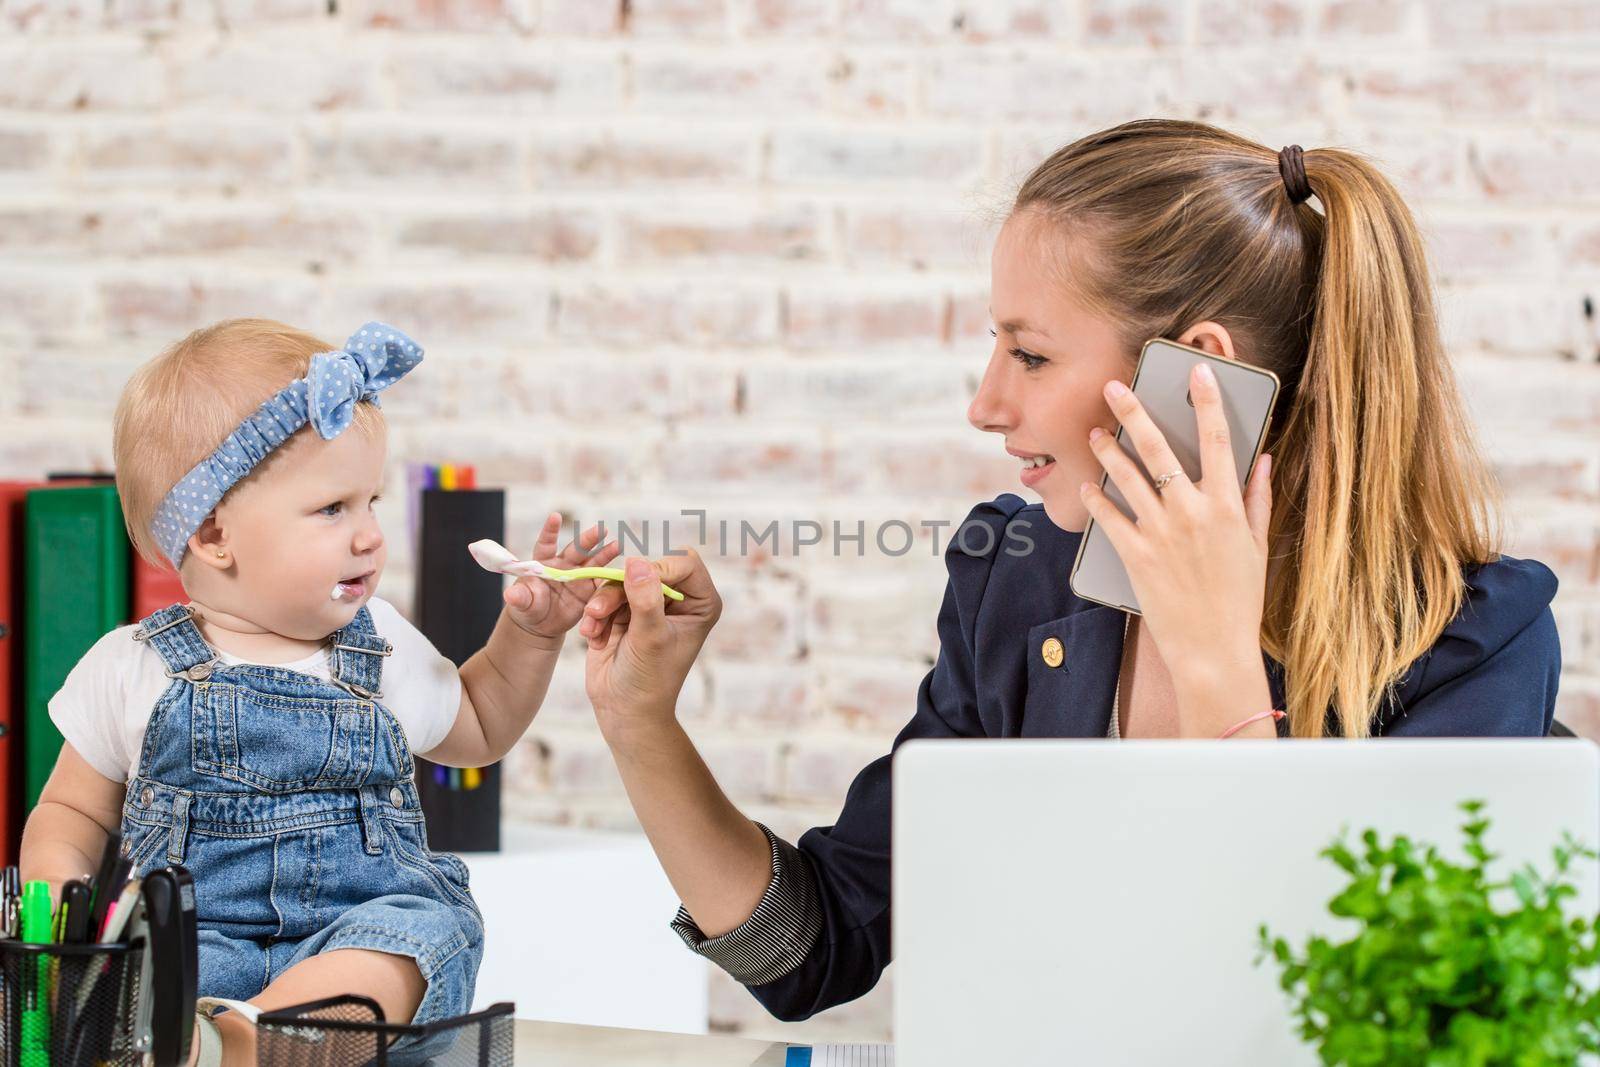 Family Business - telecommute Businesswoman and mother with kid is making a phone call. At the workplace, together with a small child